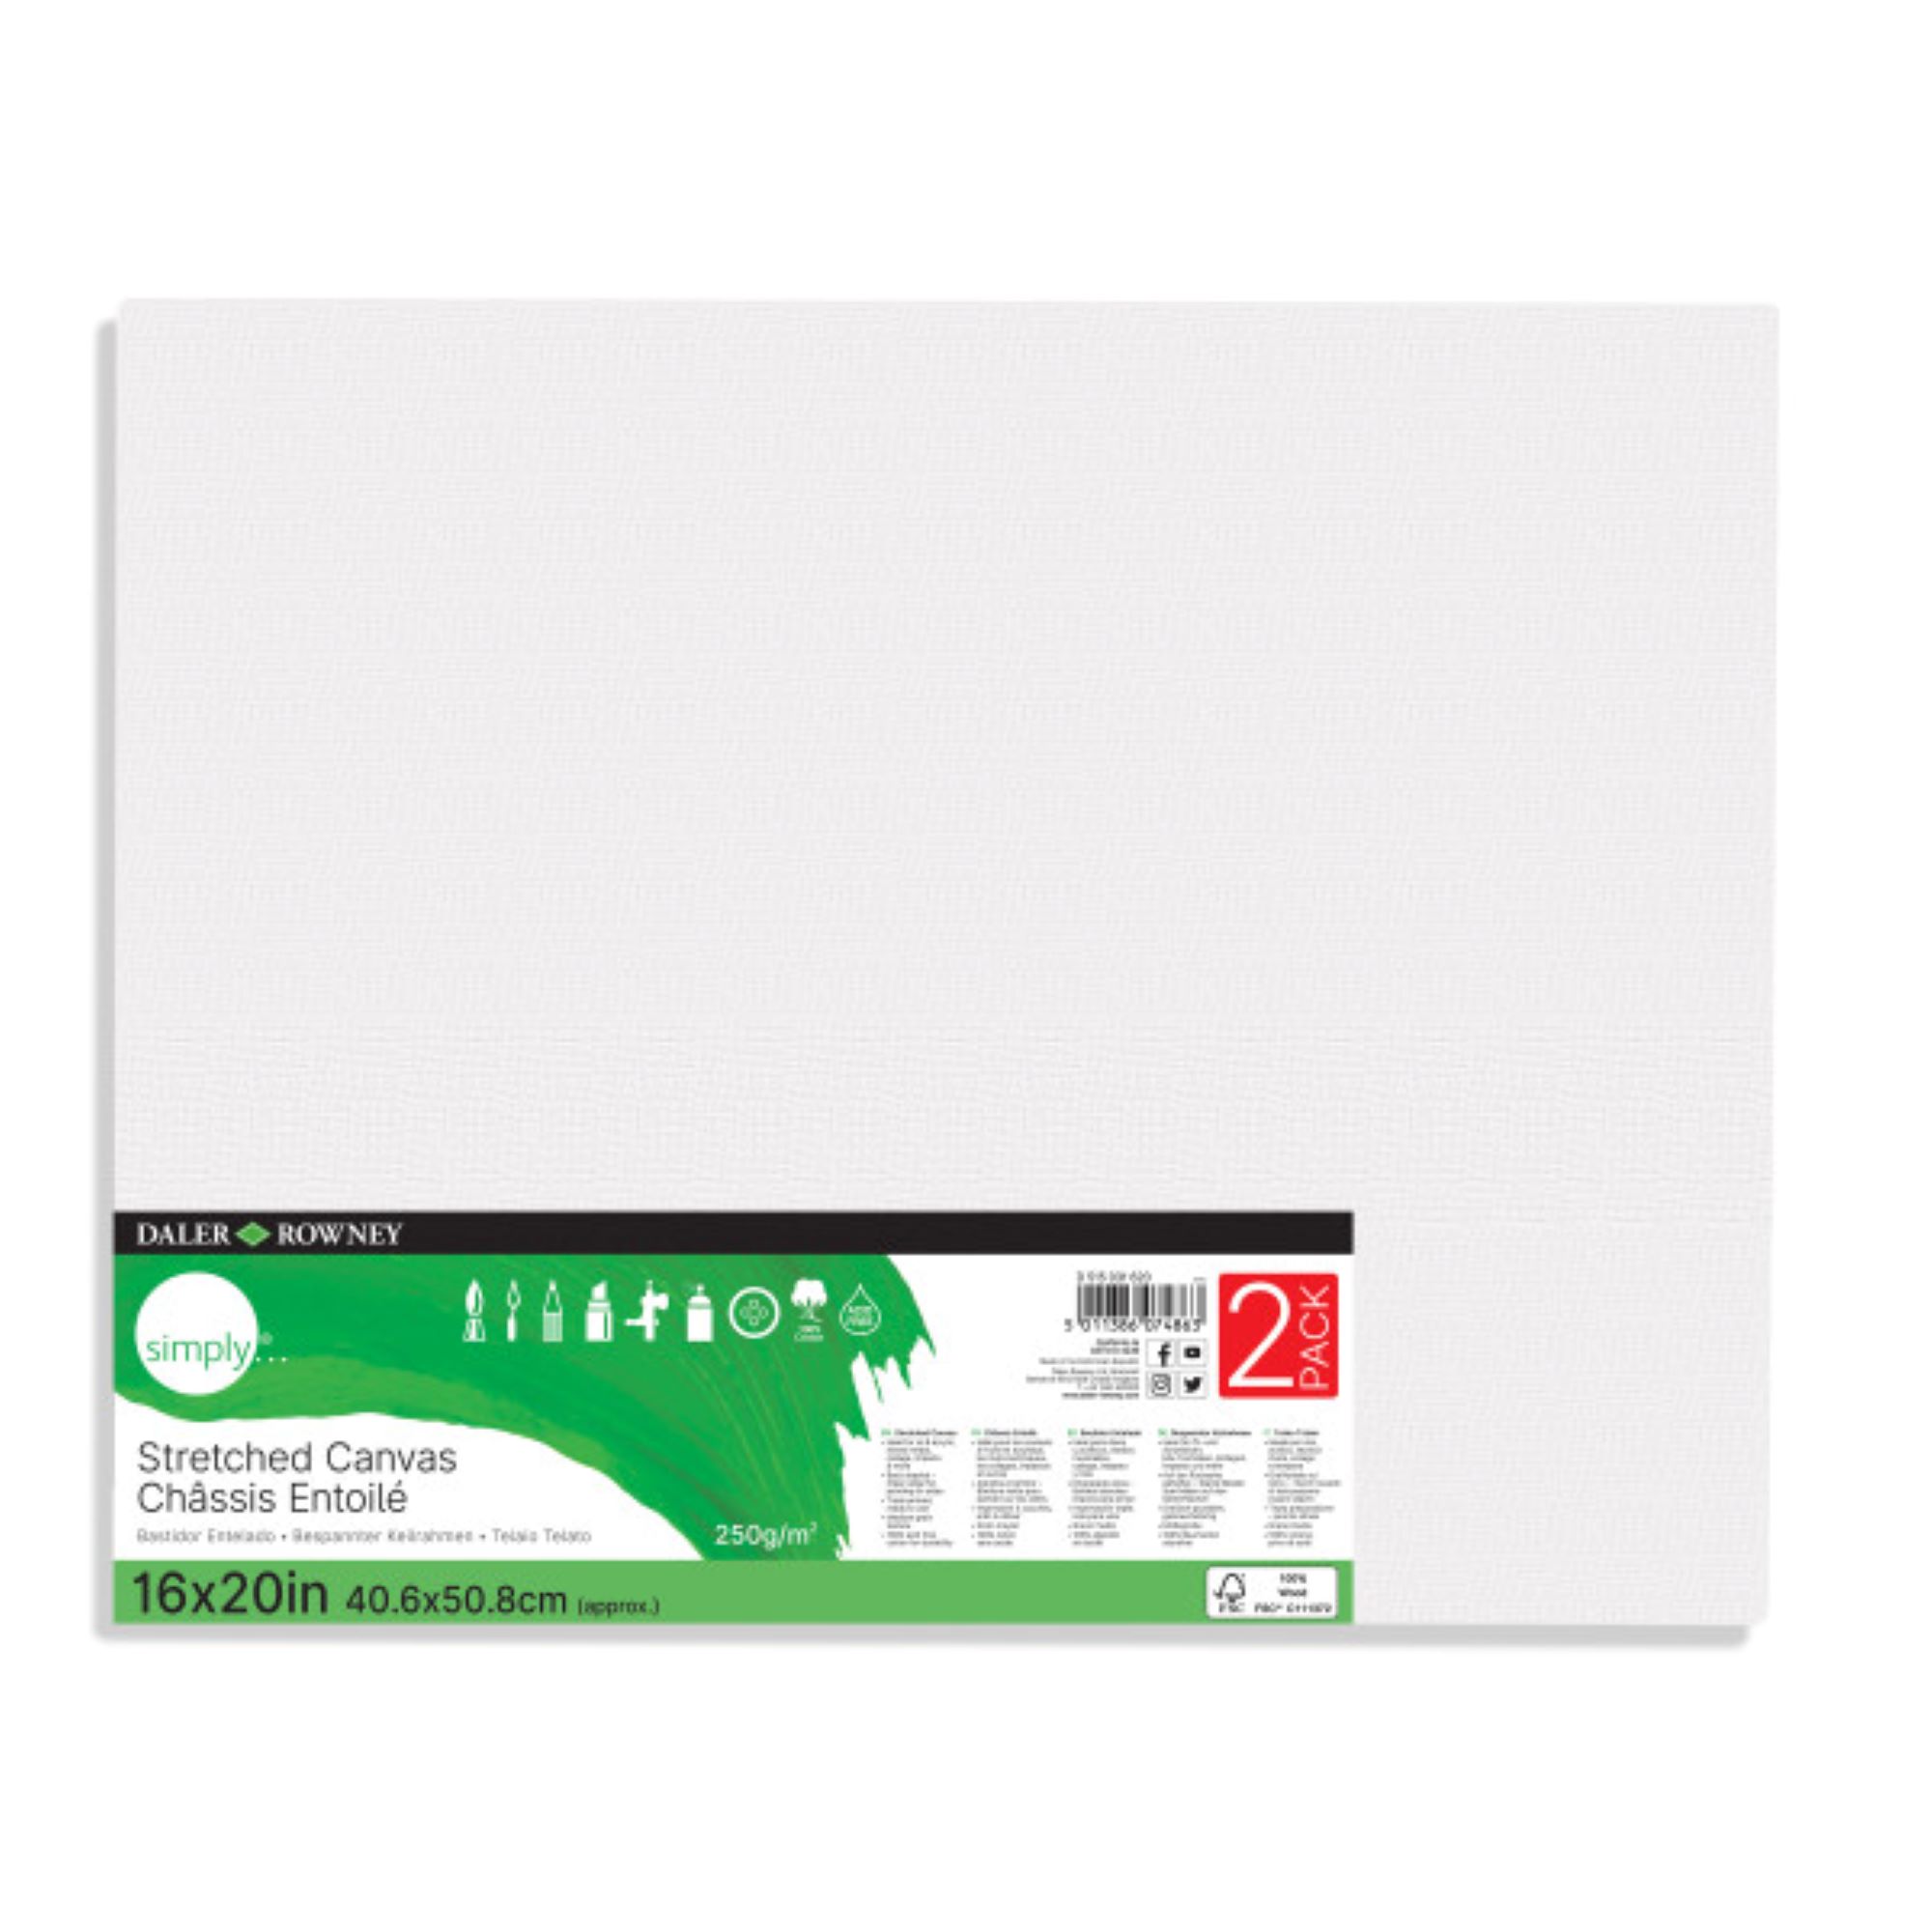 Daler-Rowney Simply Canvas, White Stretched, 16x20 inch, 2 Piece - Teens, Students, Artists, Kids - image 1 of 6